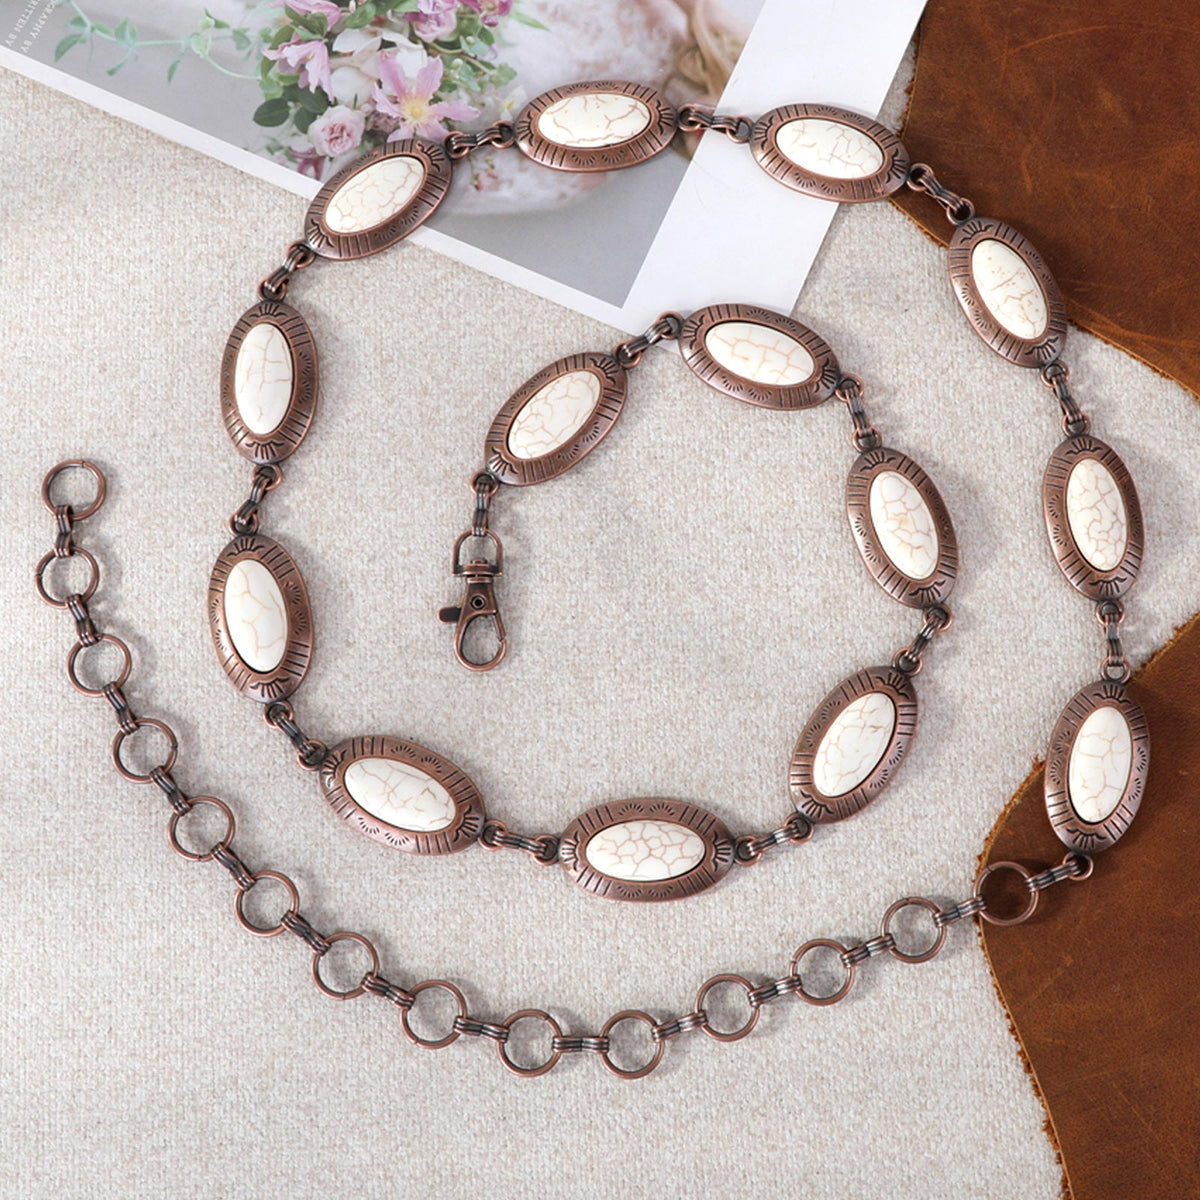 Rustic Couture Copper Concho Link Chain Belt with White Turquoise Stone